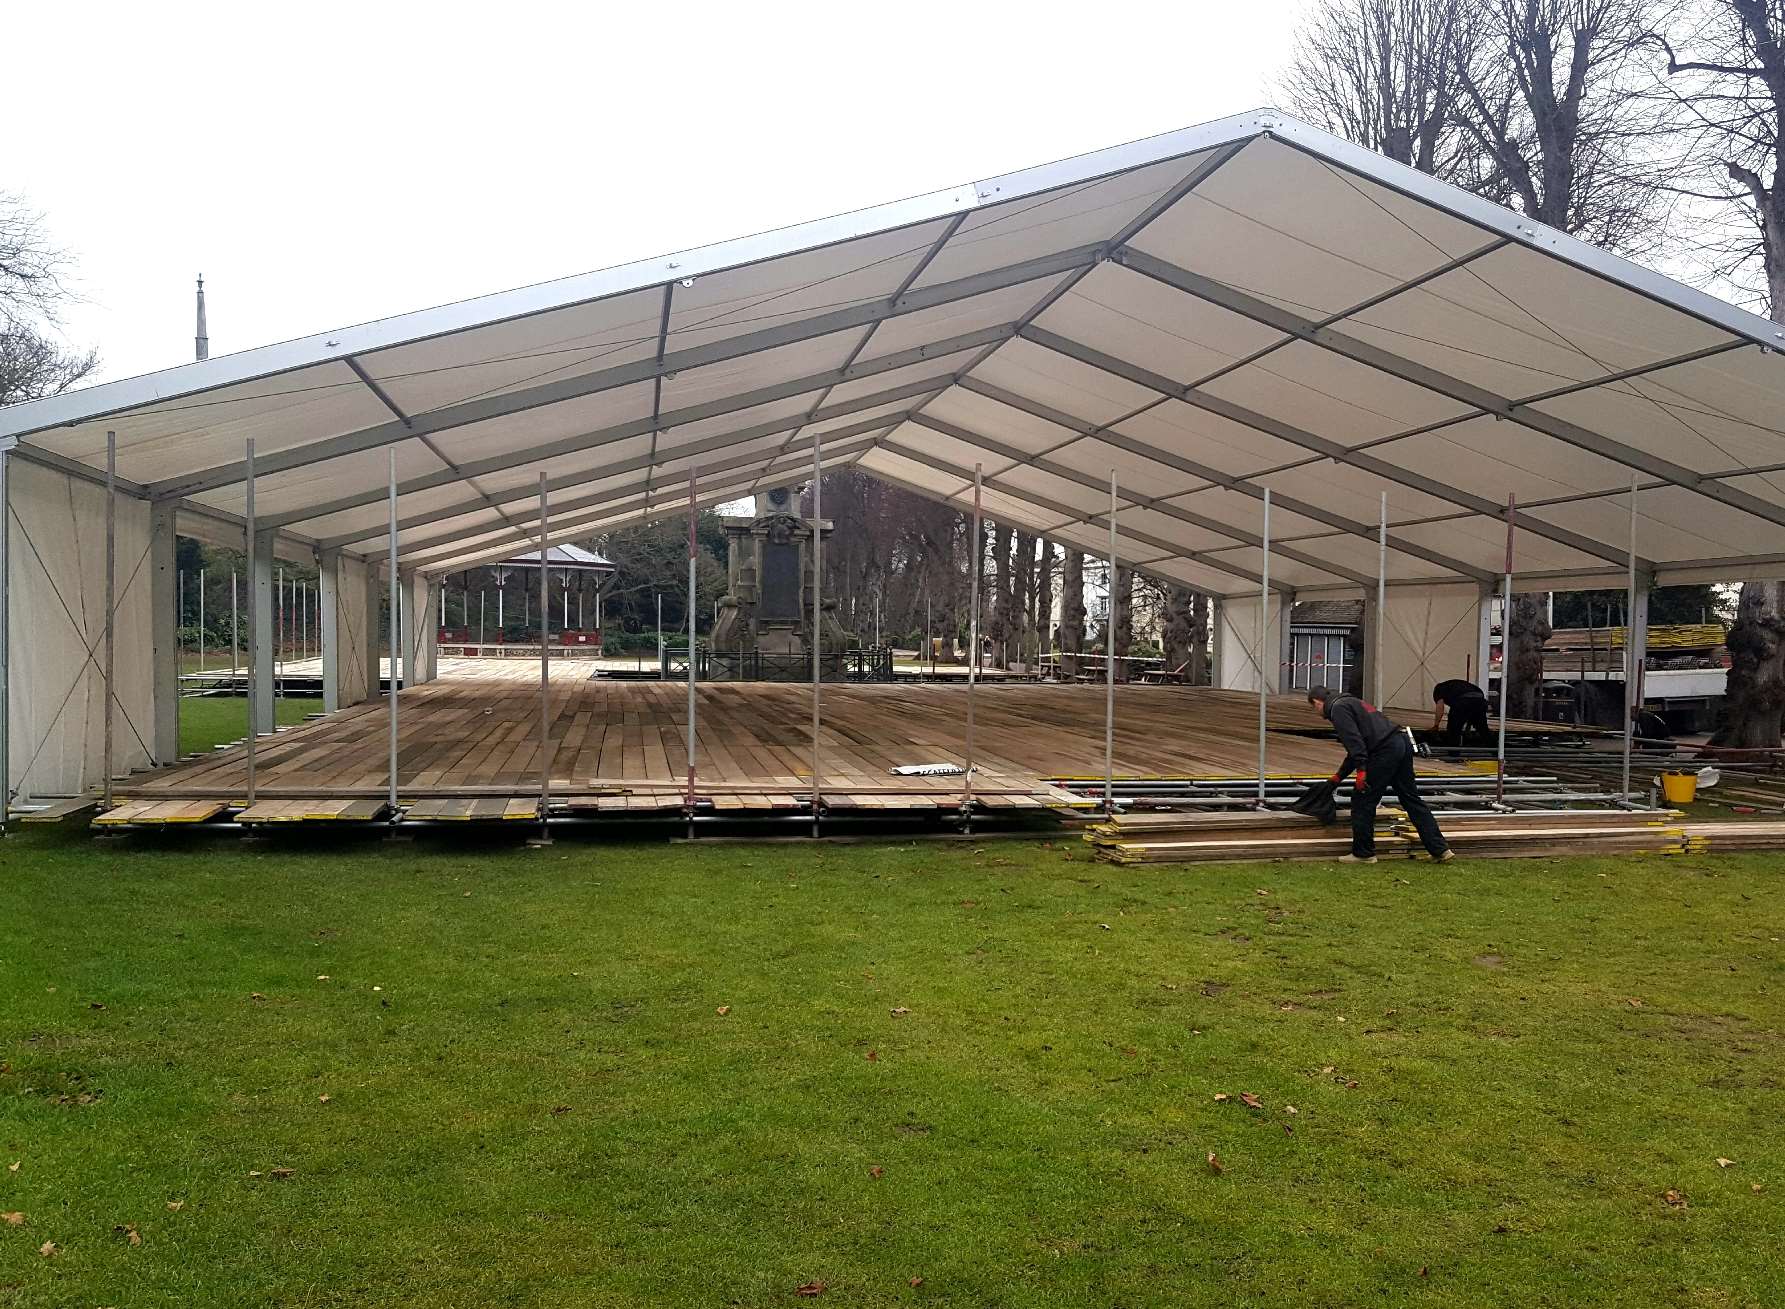 The opening of the ice rink in Canterbury's Dane John Gardens has been further delayed